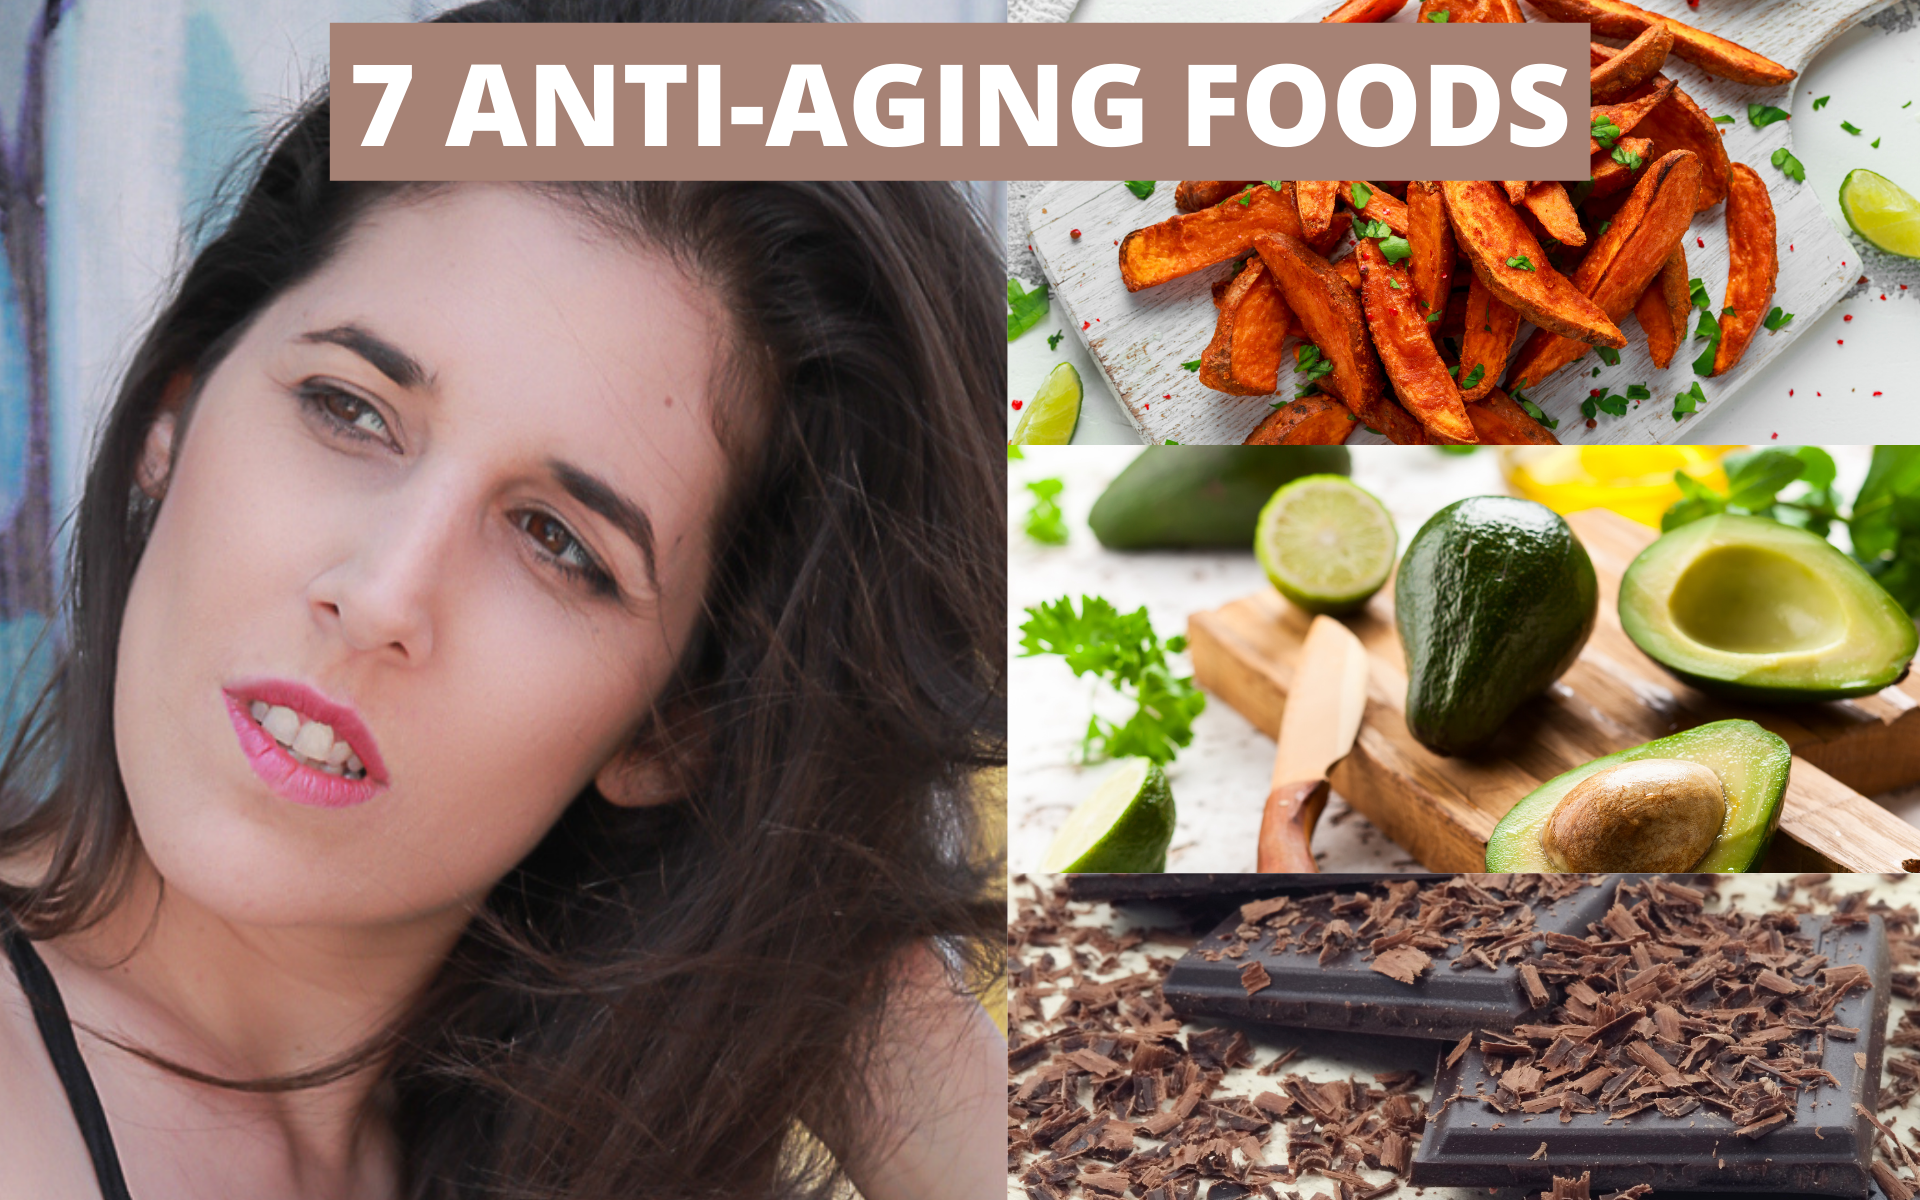 You are currently viewing 7 ANTI-AGING FOODS THAT WILL MAKE YOUR SKIN LOOK YOUNGER